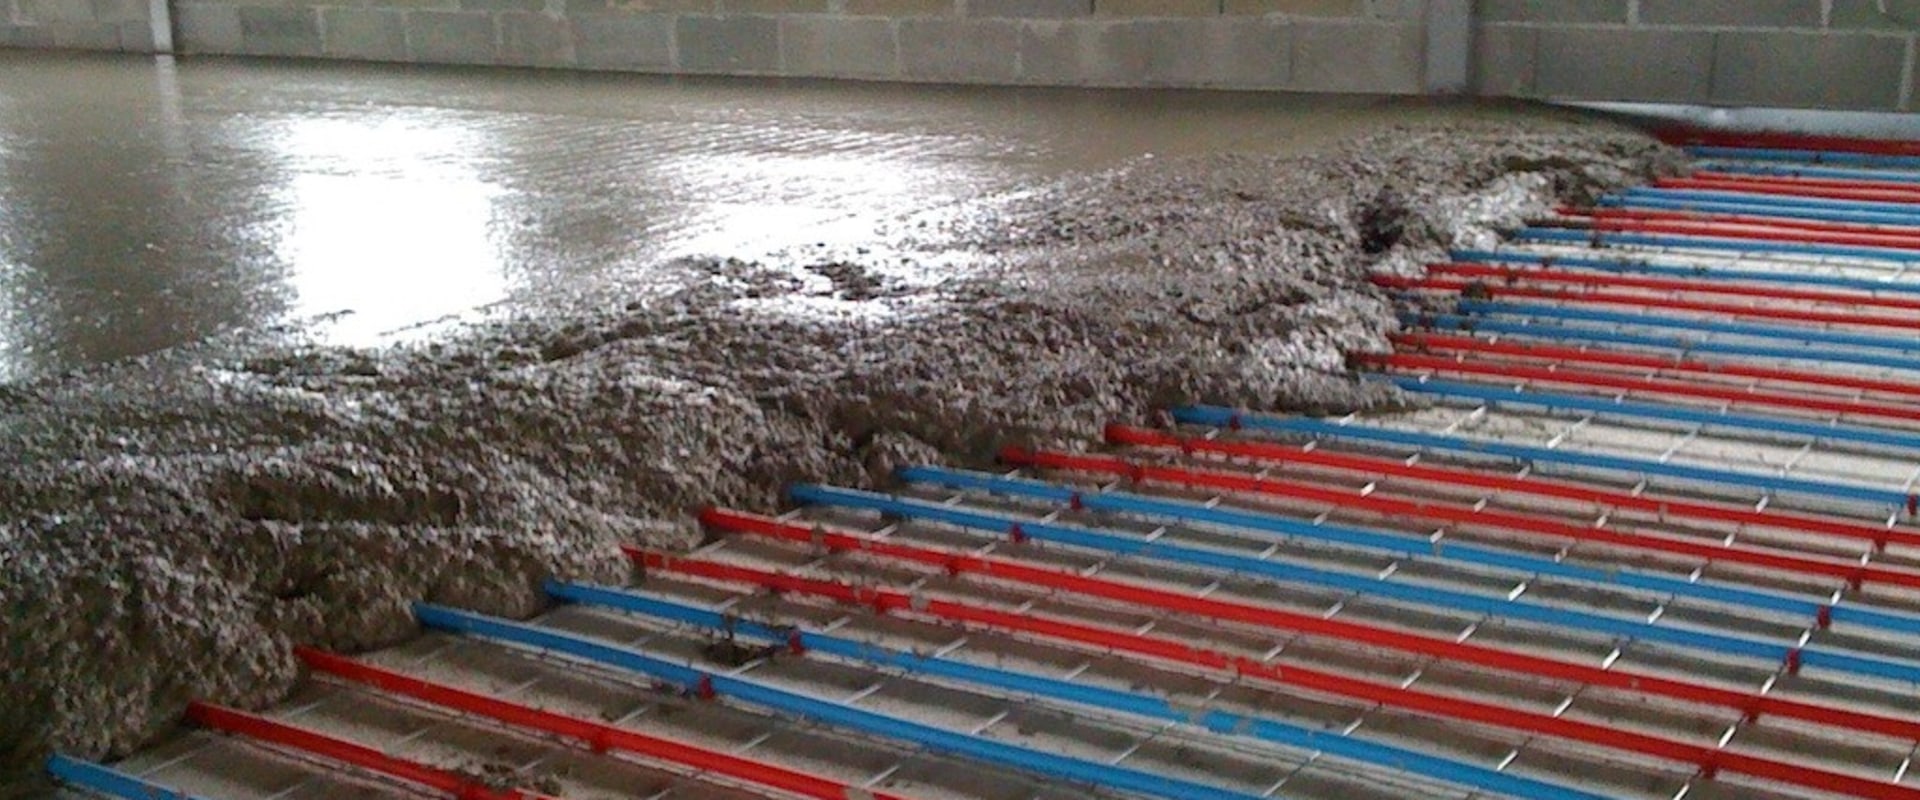 Does underfloor heating need to be serviced?